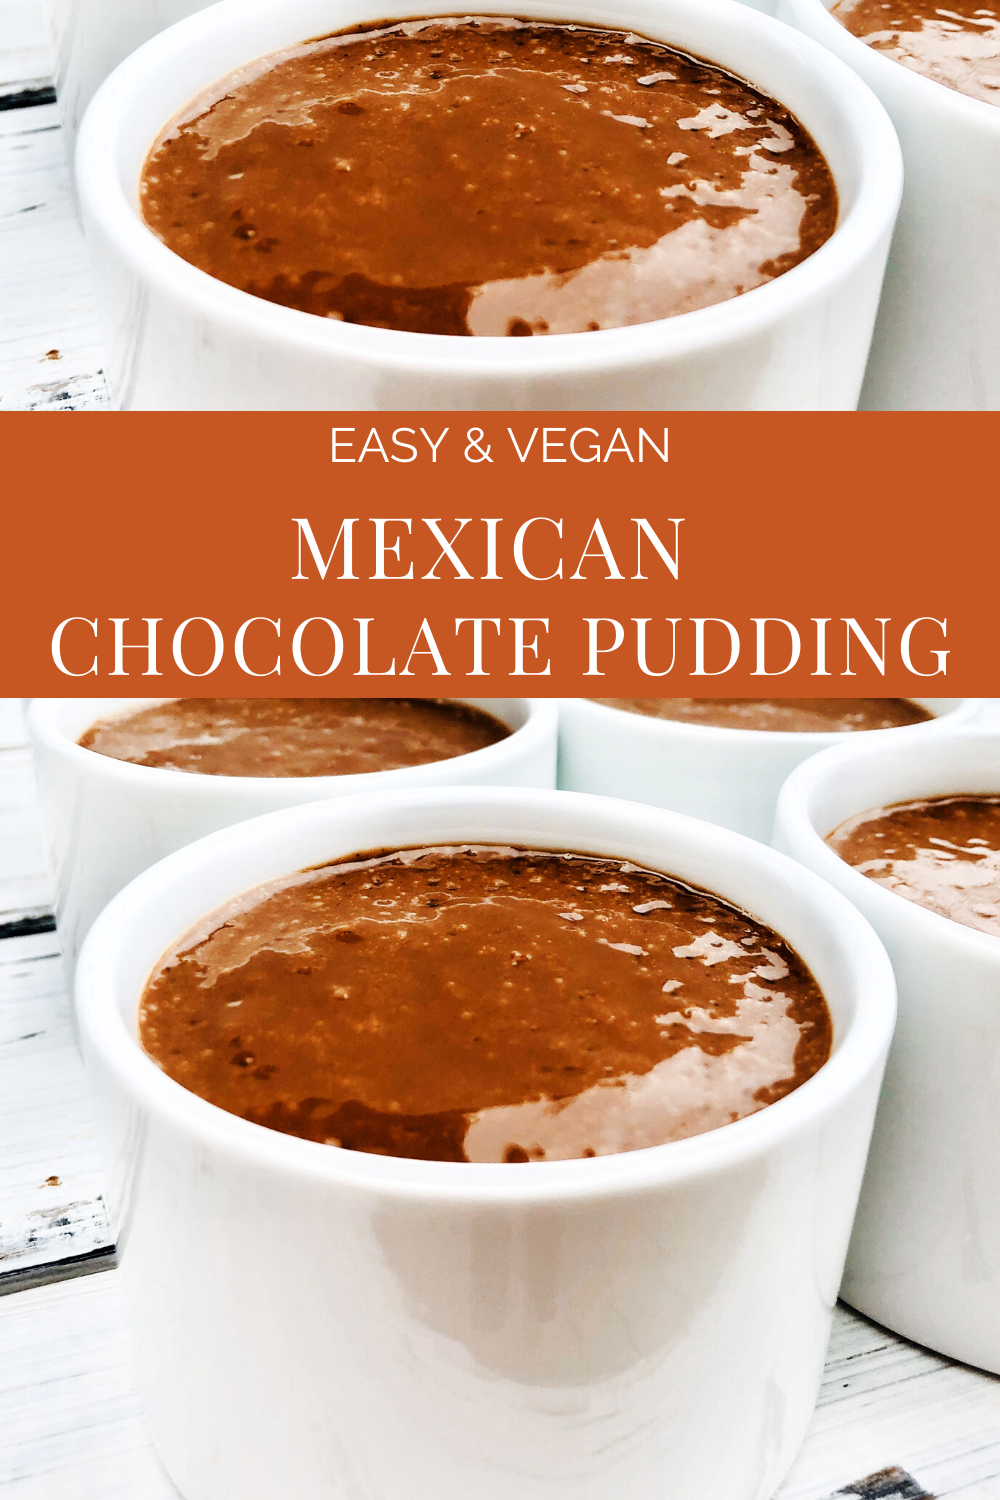 A quick and easy recipe for Mexican-inspired dairy-free chocolate pudding. Rich, chocolatey, and spiced with the earthy flavors of cinnamon and chile powder, this simple and satisfying treat is perfect as a Cinco de Mayo dessert or anytime you want a no-fuss make-ahead indulgence everyone will love! via @thiswifecooks